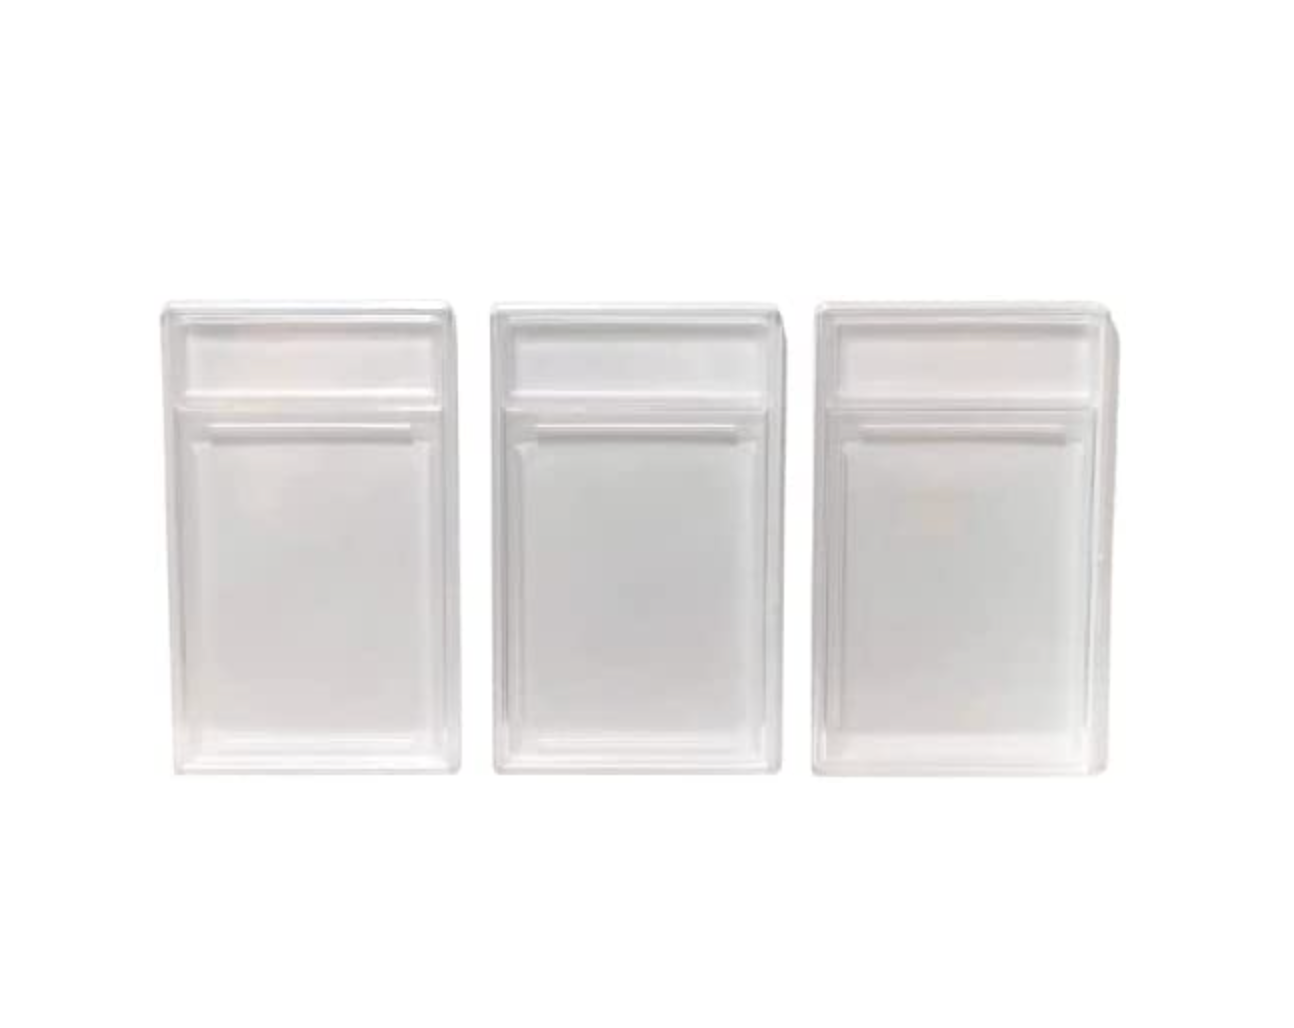 10 Pcs Trading Cards Protector Case Acrylic Clear Graded Card Holders with Label Position Hard Card Sleeves, Size: 65